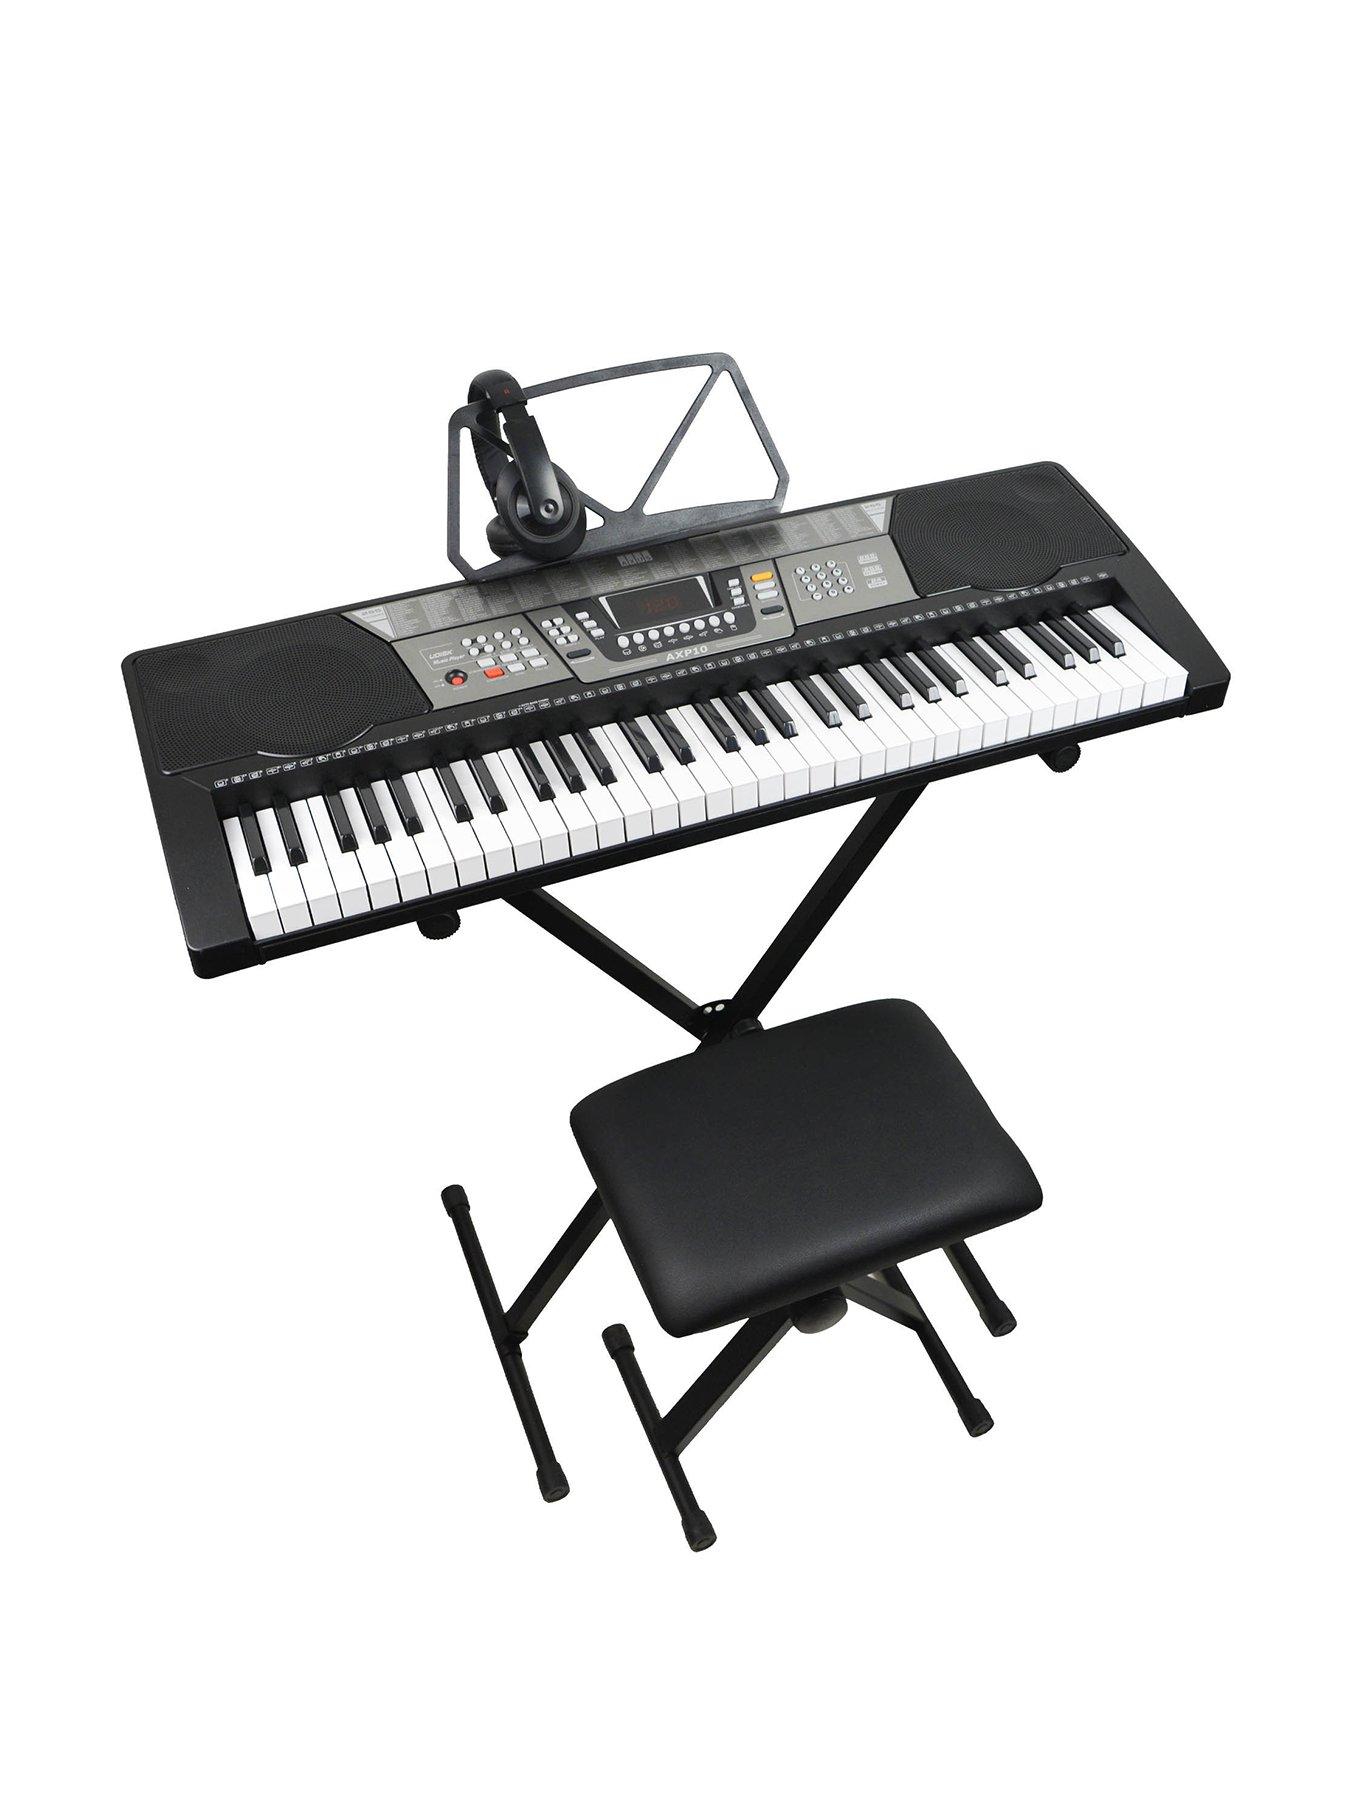 RockJam 6150 61-Key Keyboard Piano Kit with Pitch Bend, Keyboard Bench,  Digital Piano Stool, Lessons and Headphones